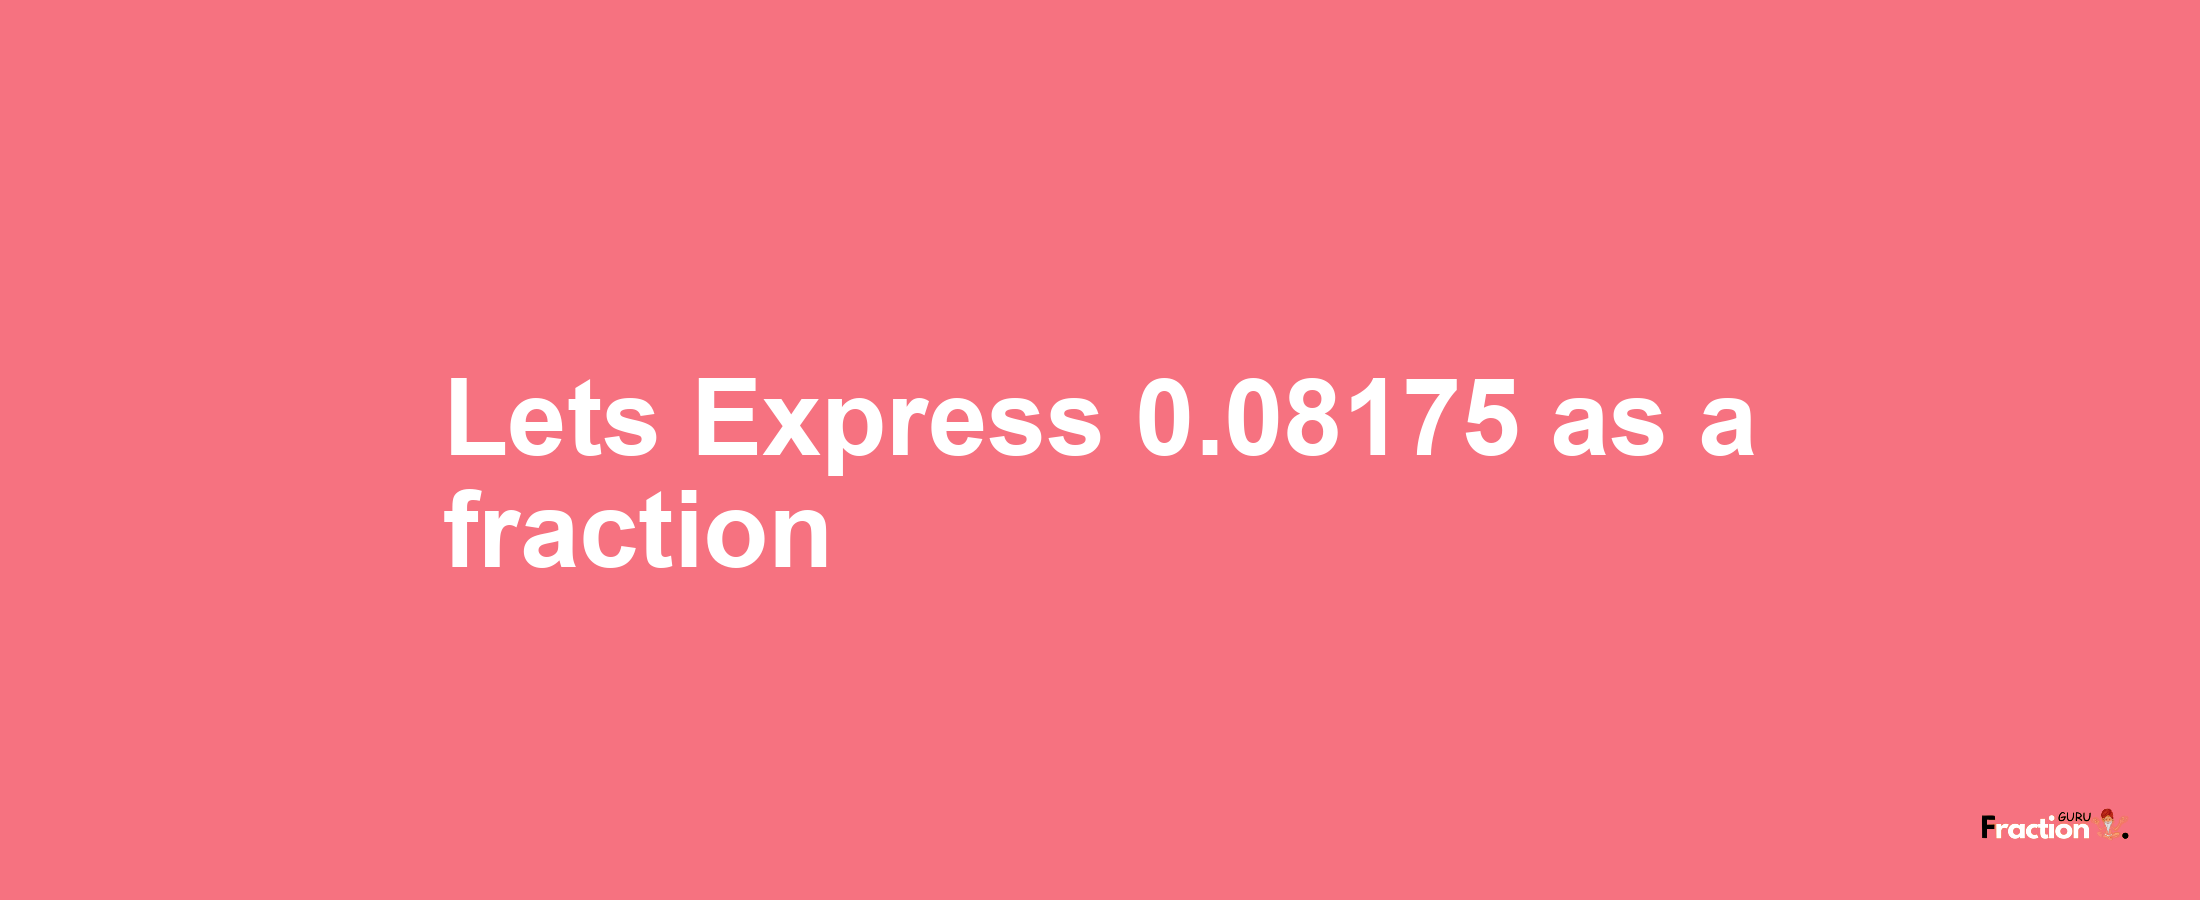 Lets Express 0.08175 as afraction